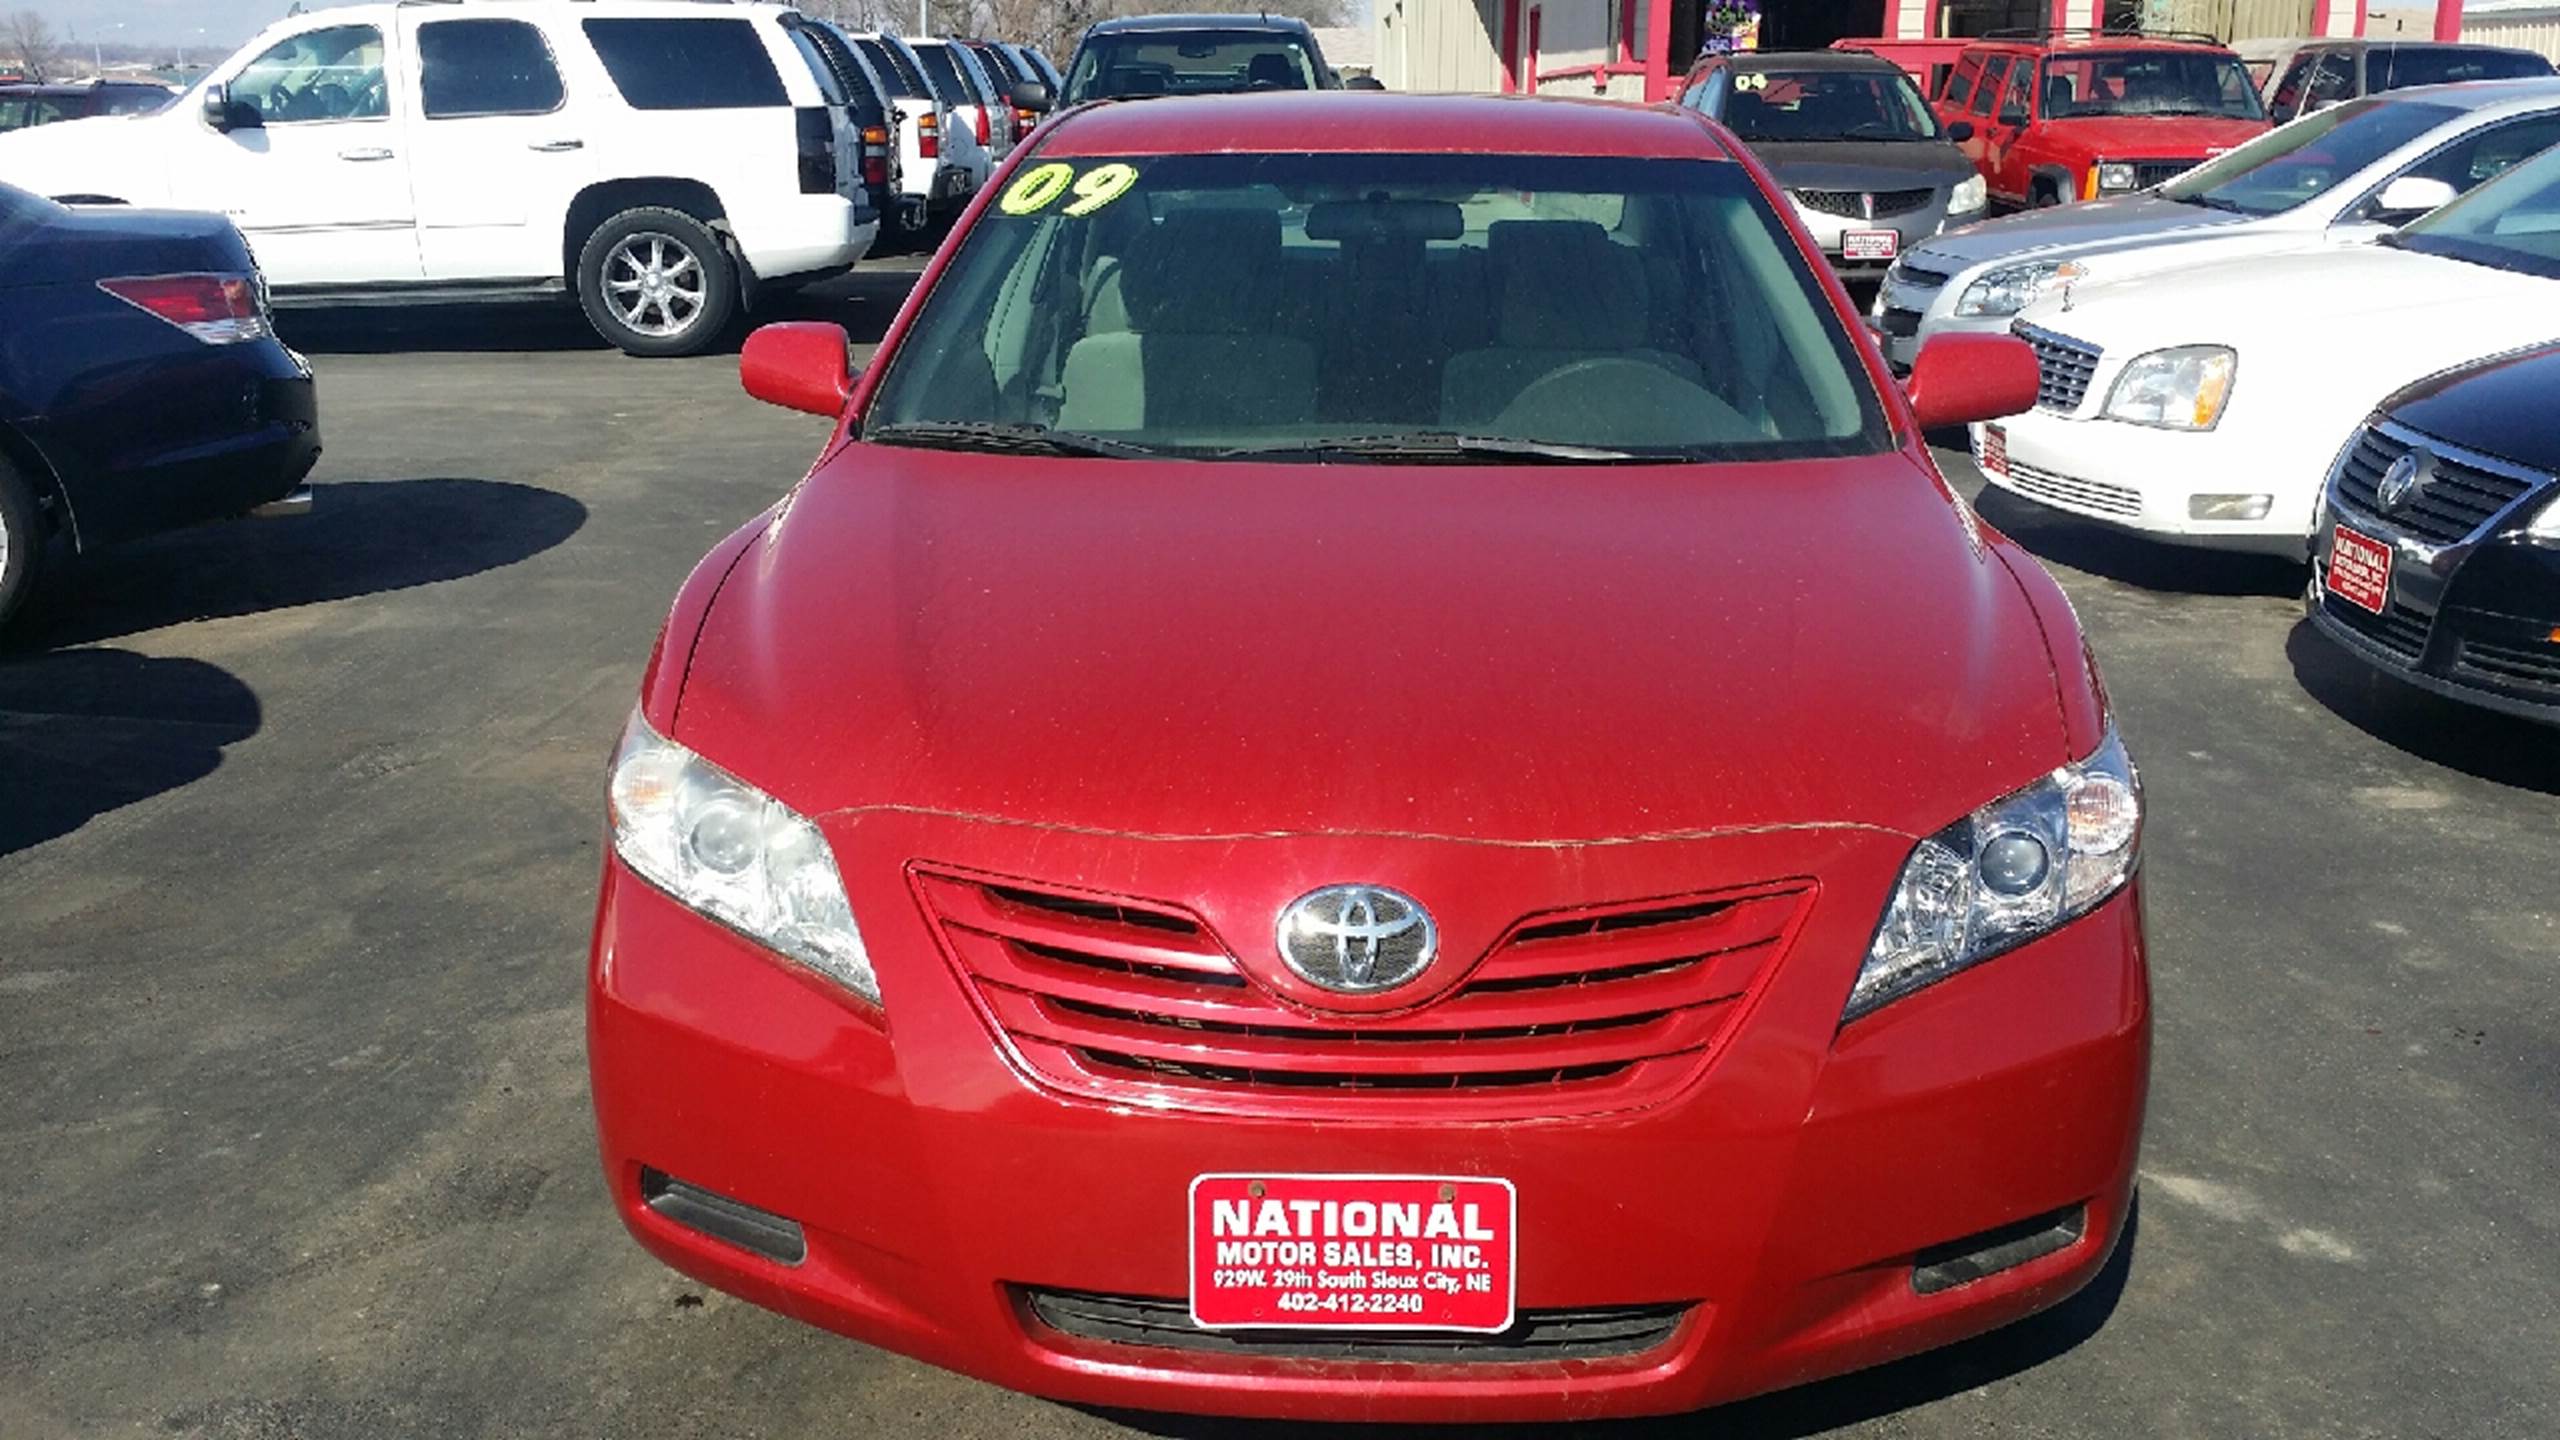 2009 Toyota Camry for sale at National Motor Sales Inc in South Sioux City NE